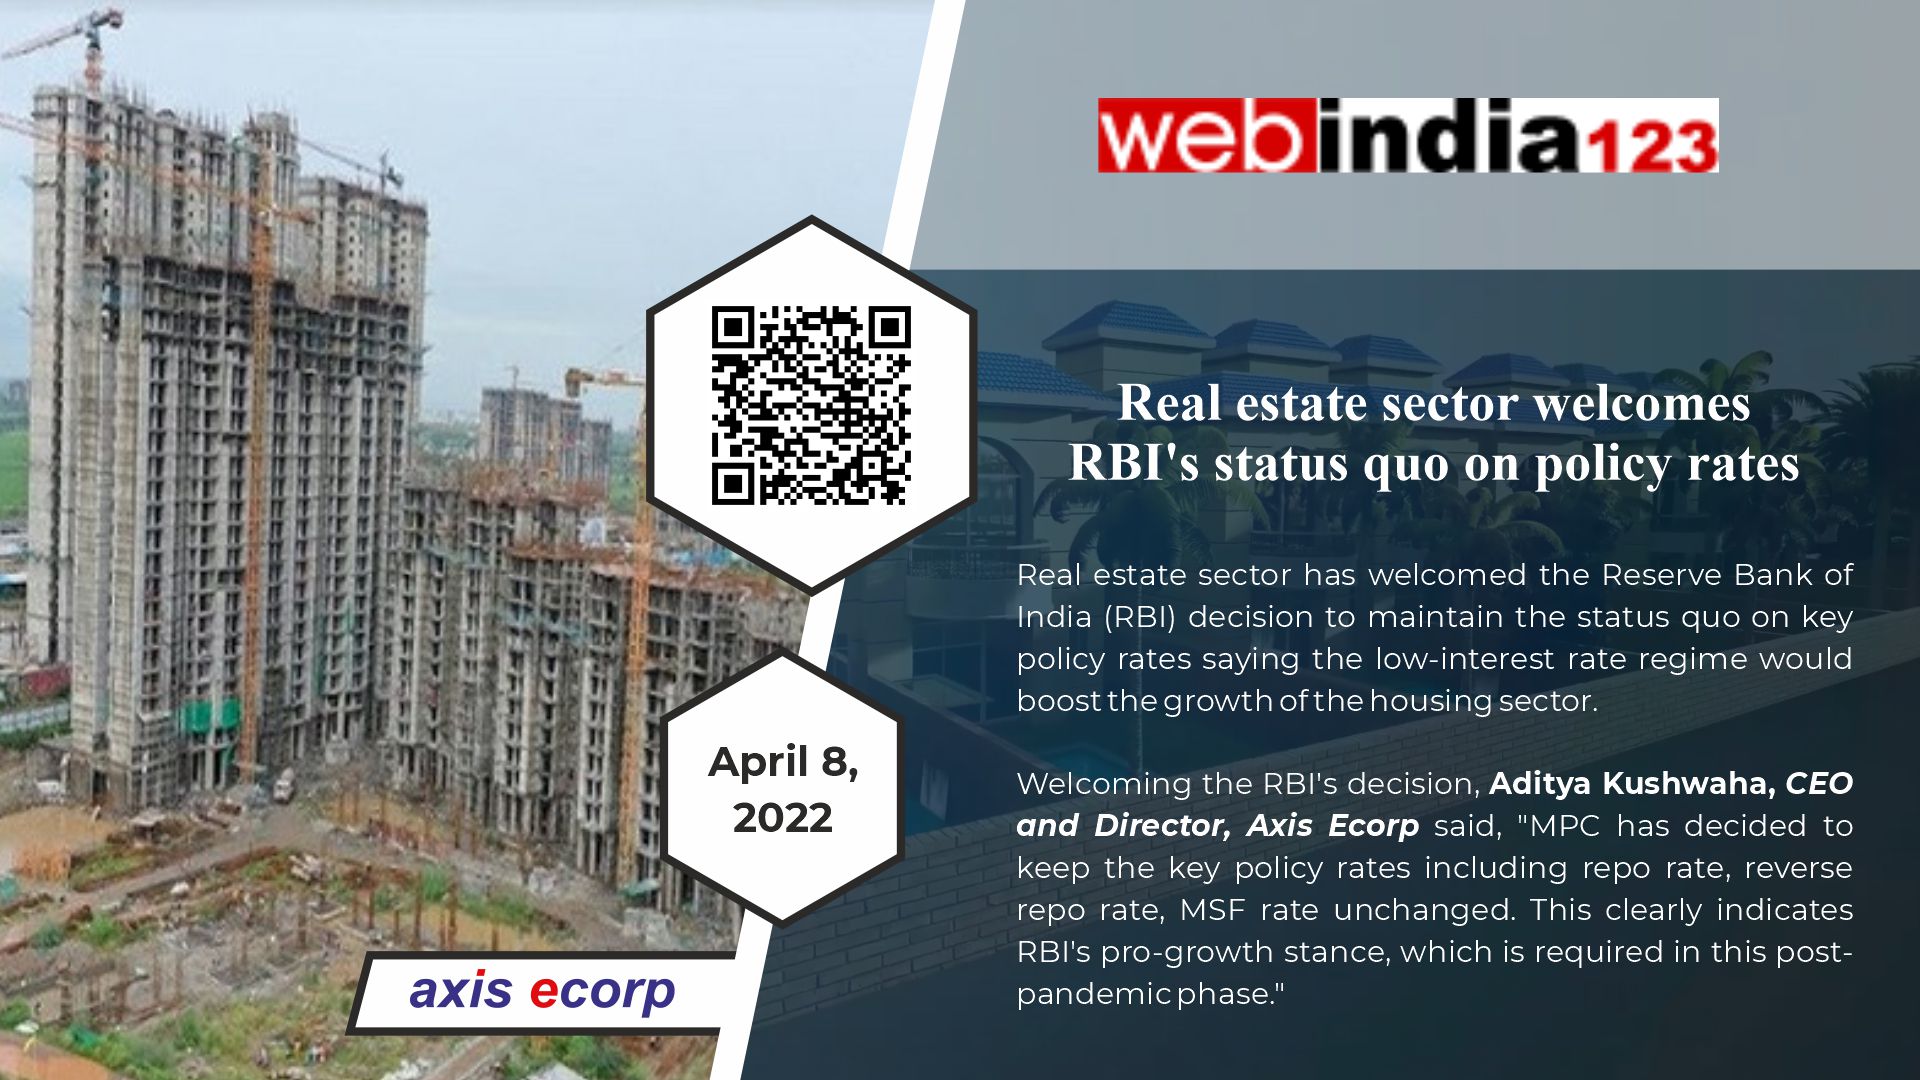 Real estate sector welcomes RBI's status quo on policy rates